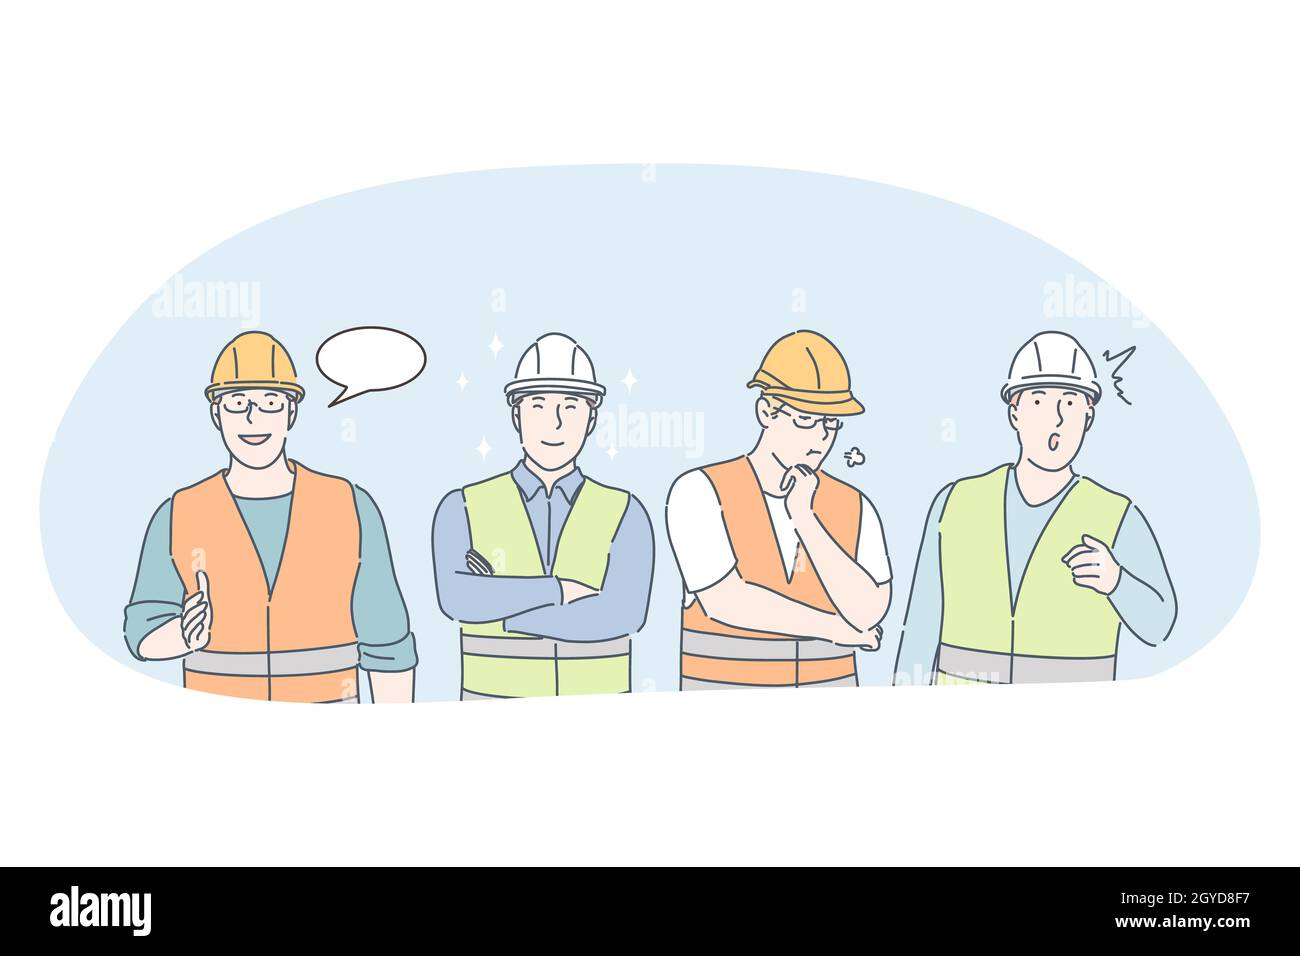 Engineering and construction workers concept. Men professional engineers, builders and managers cartoon characters in protective helmets and uniform c Stock Photo